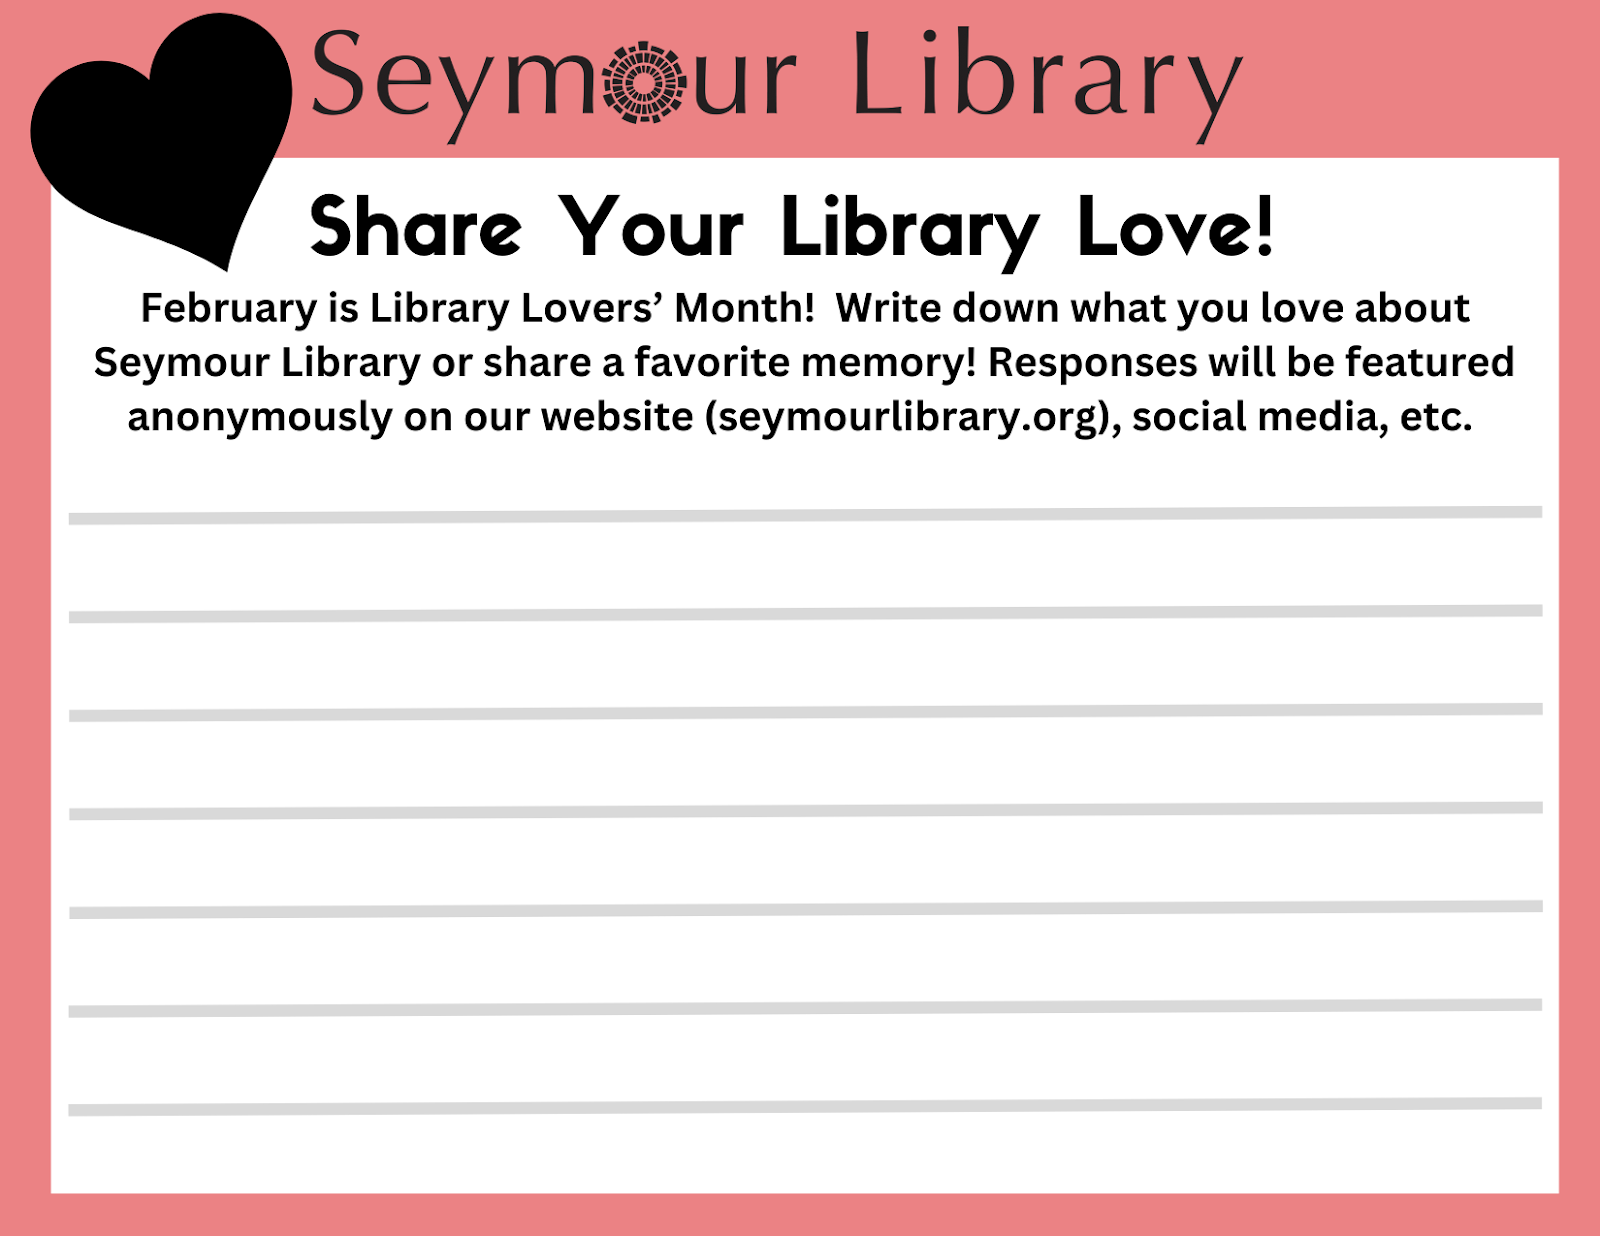 Share Your Library Love!